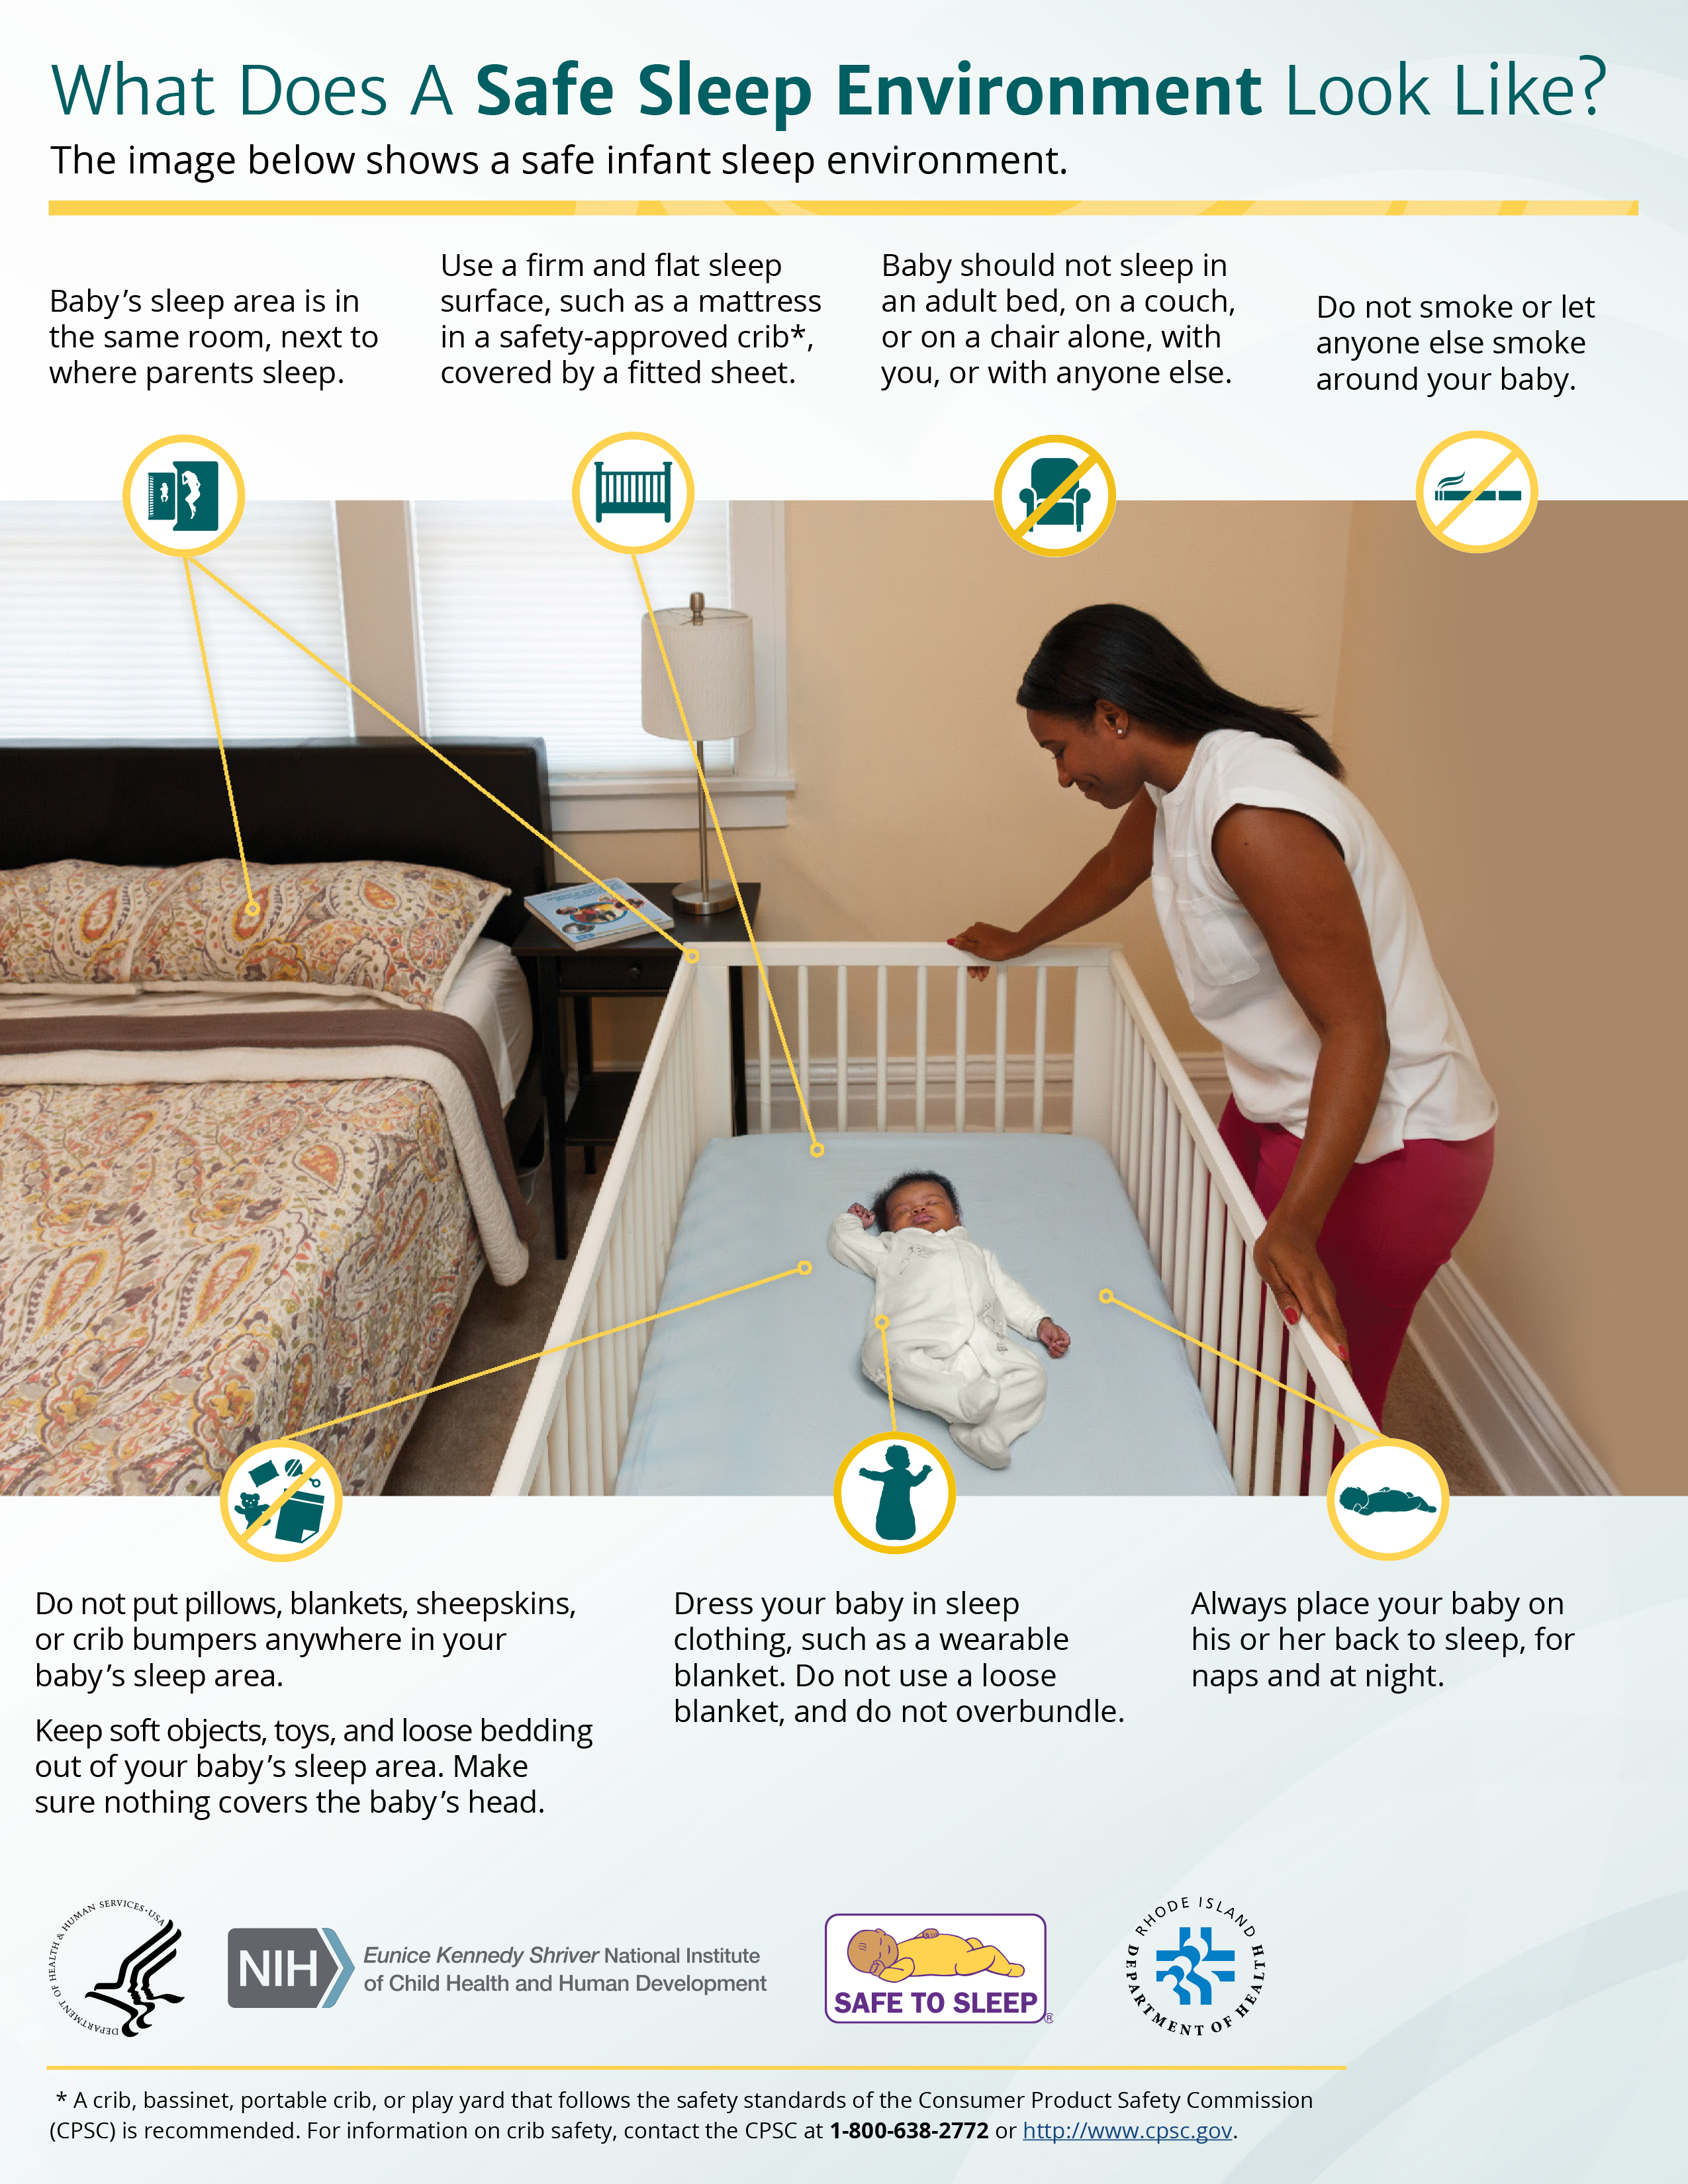 What does a safe sleep environment look like?